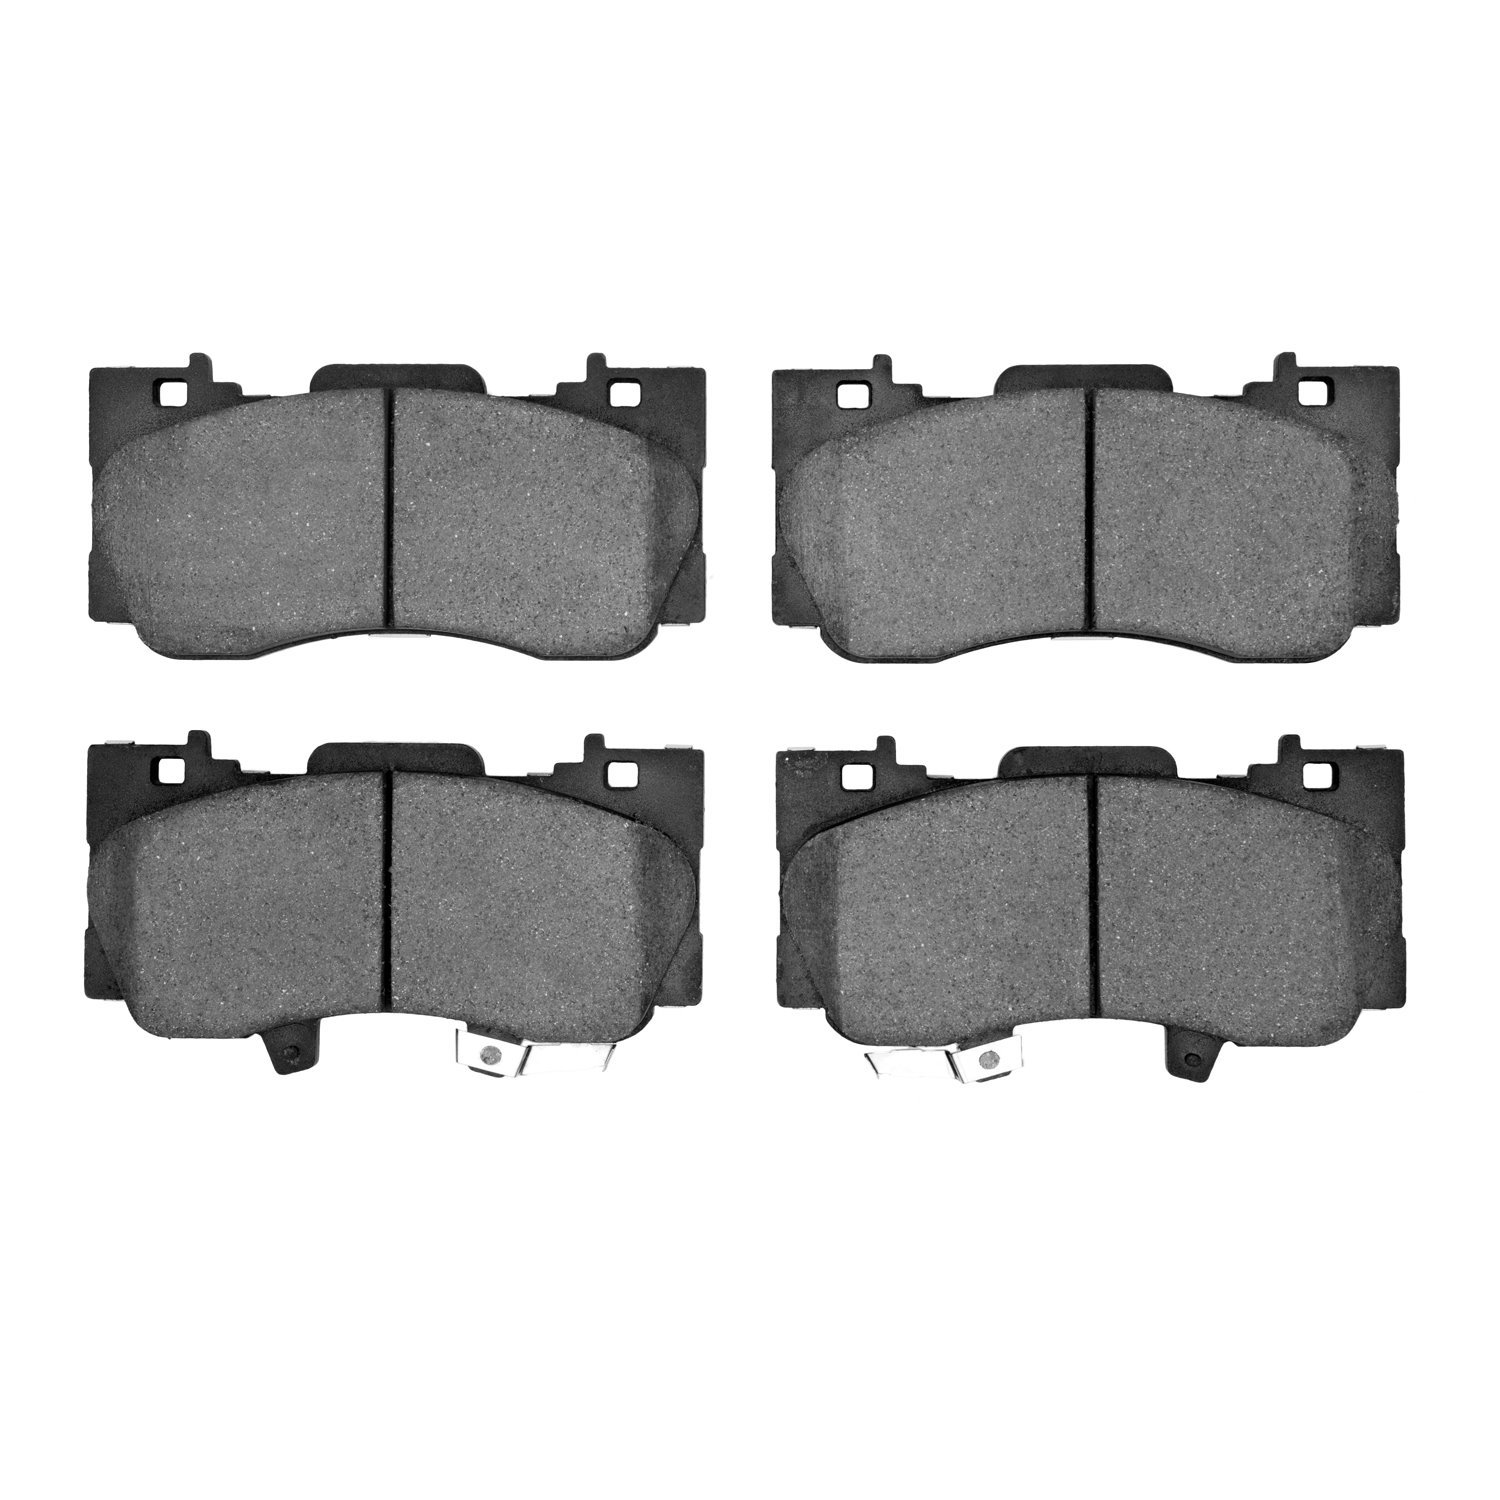 1310-1784-00 3000-Series Ceramic Brake Pads, Fits Select Ford/Lincoln/Mercury/Mazda, Position: Front